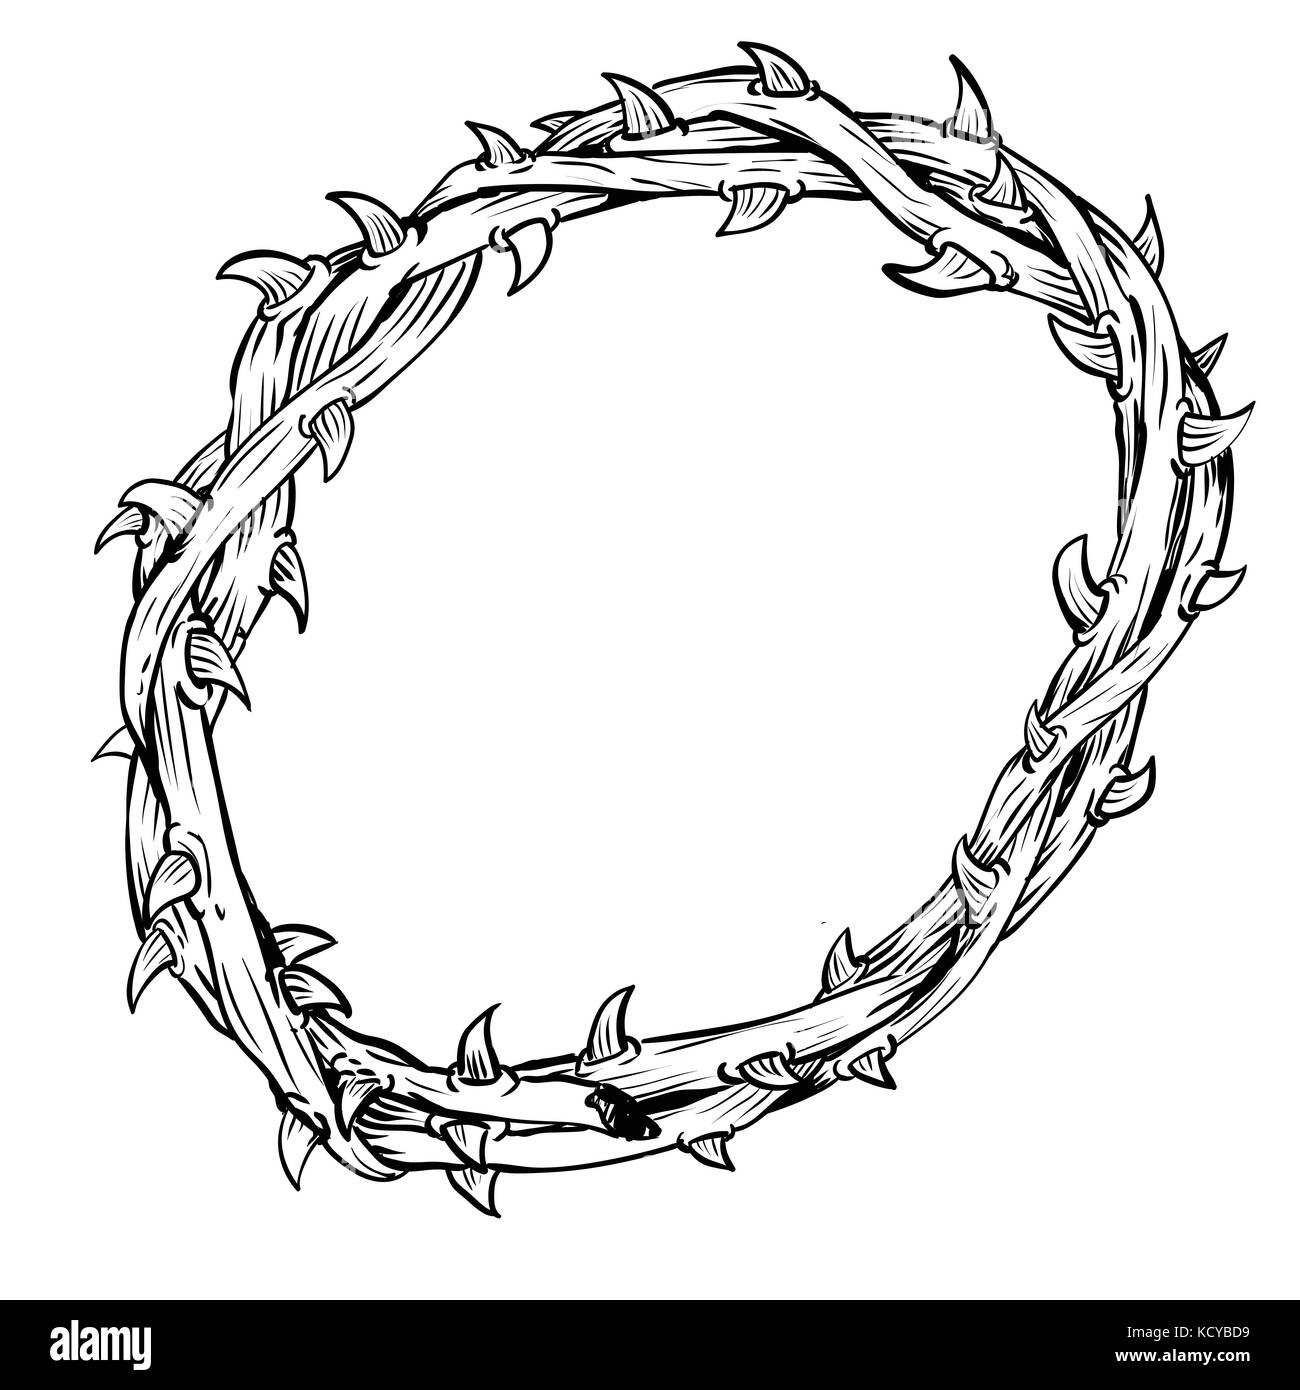 Crown Thorns Vintage Illustration Stock Vector (Royalty Free